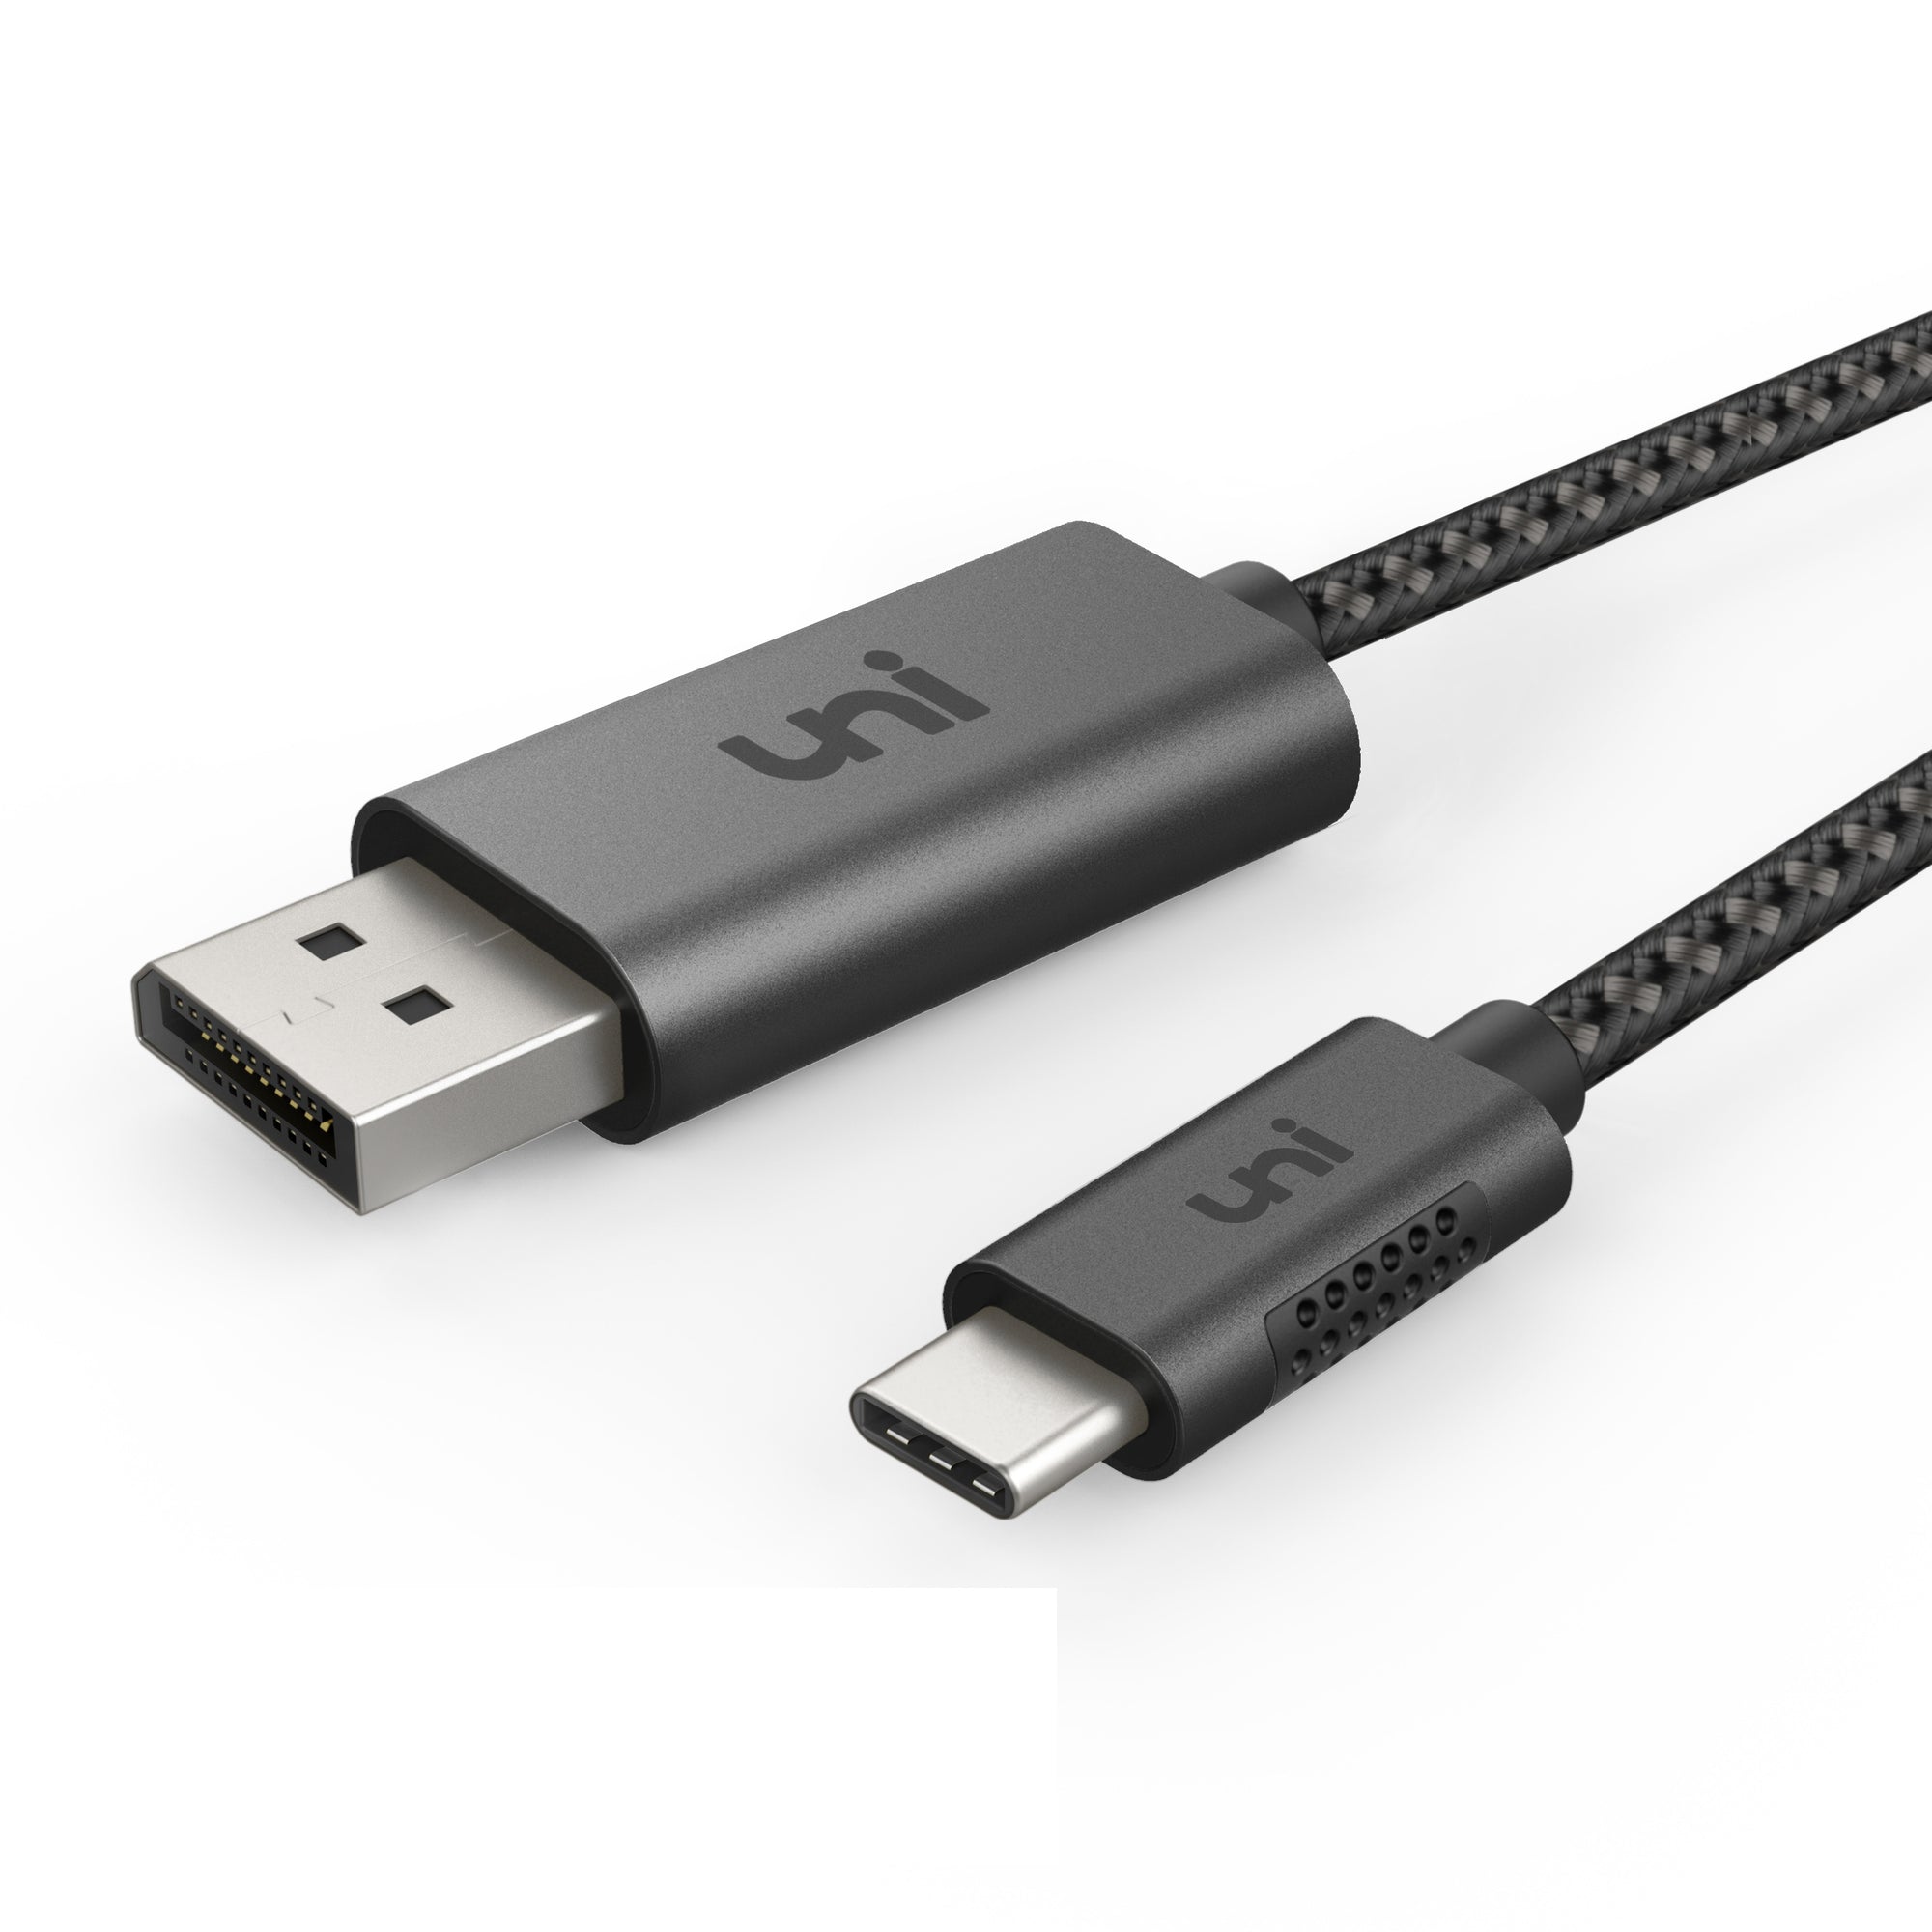 4K USB C To Display Port cable